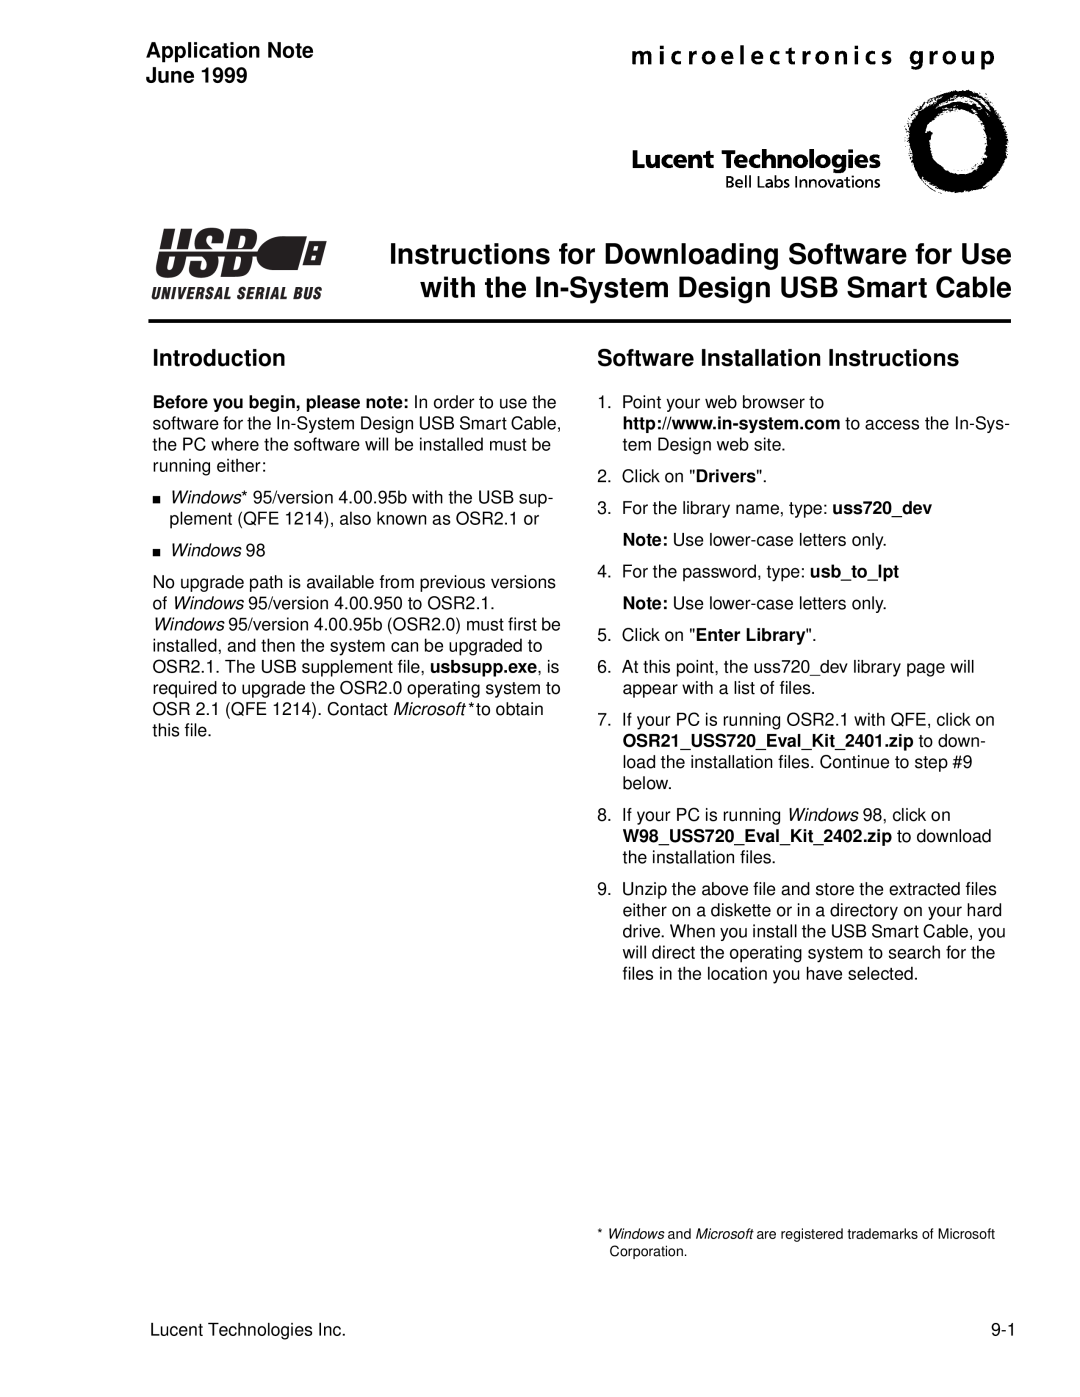 Lucent Technologies USS-720 manual Software Installation Instructions, Application Note June, Introduction 